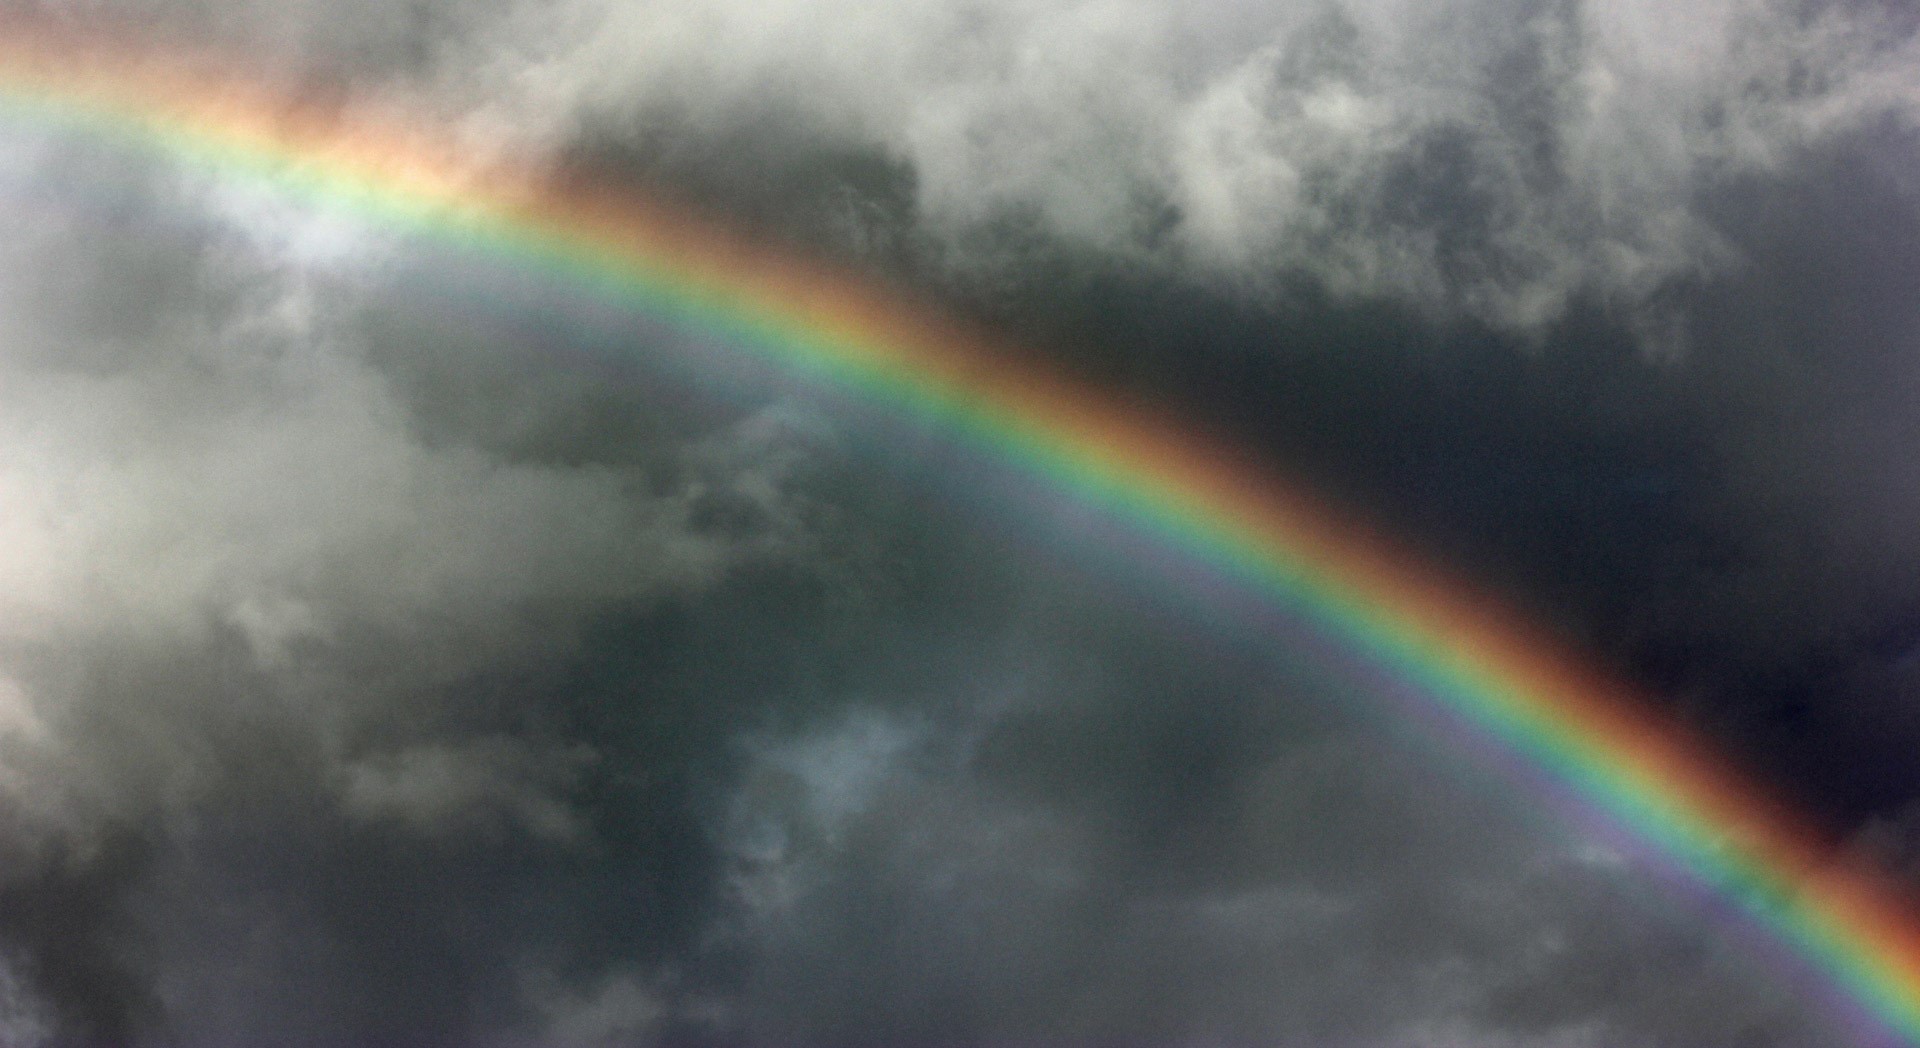 More Rainbows Could Be A Climate Change Silver Lining